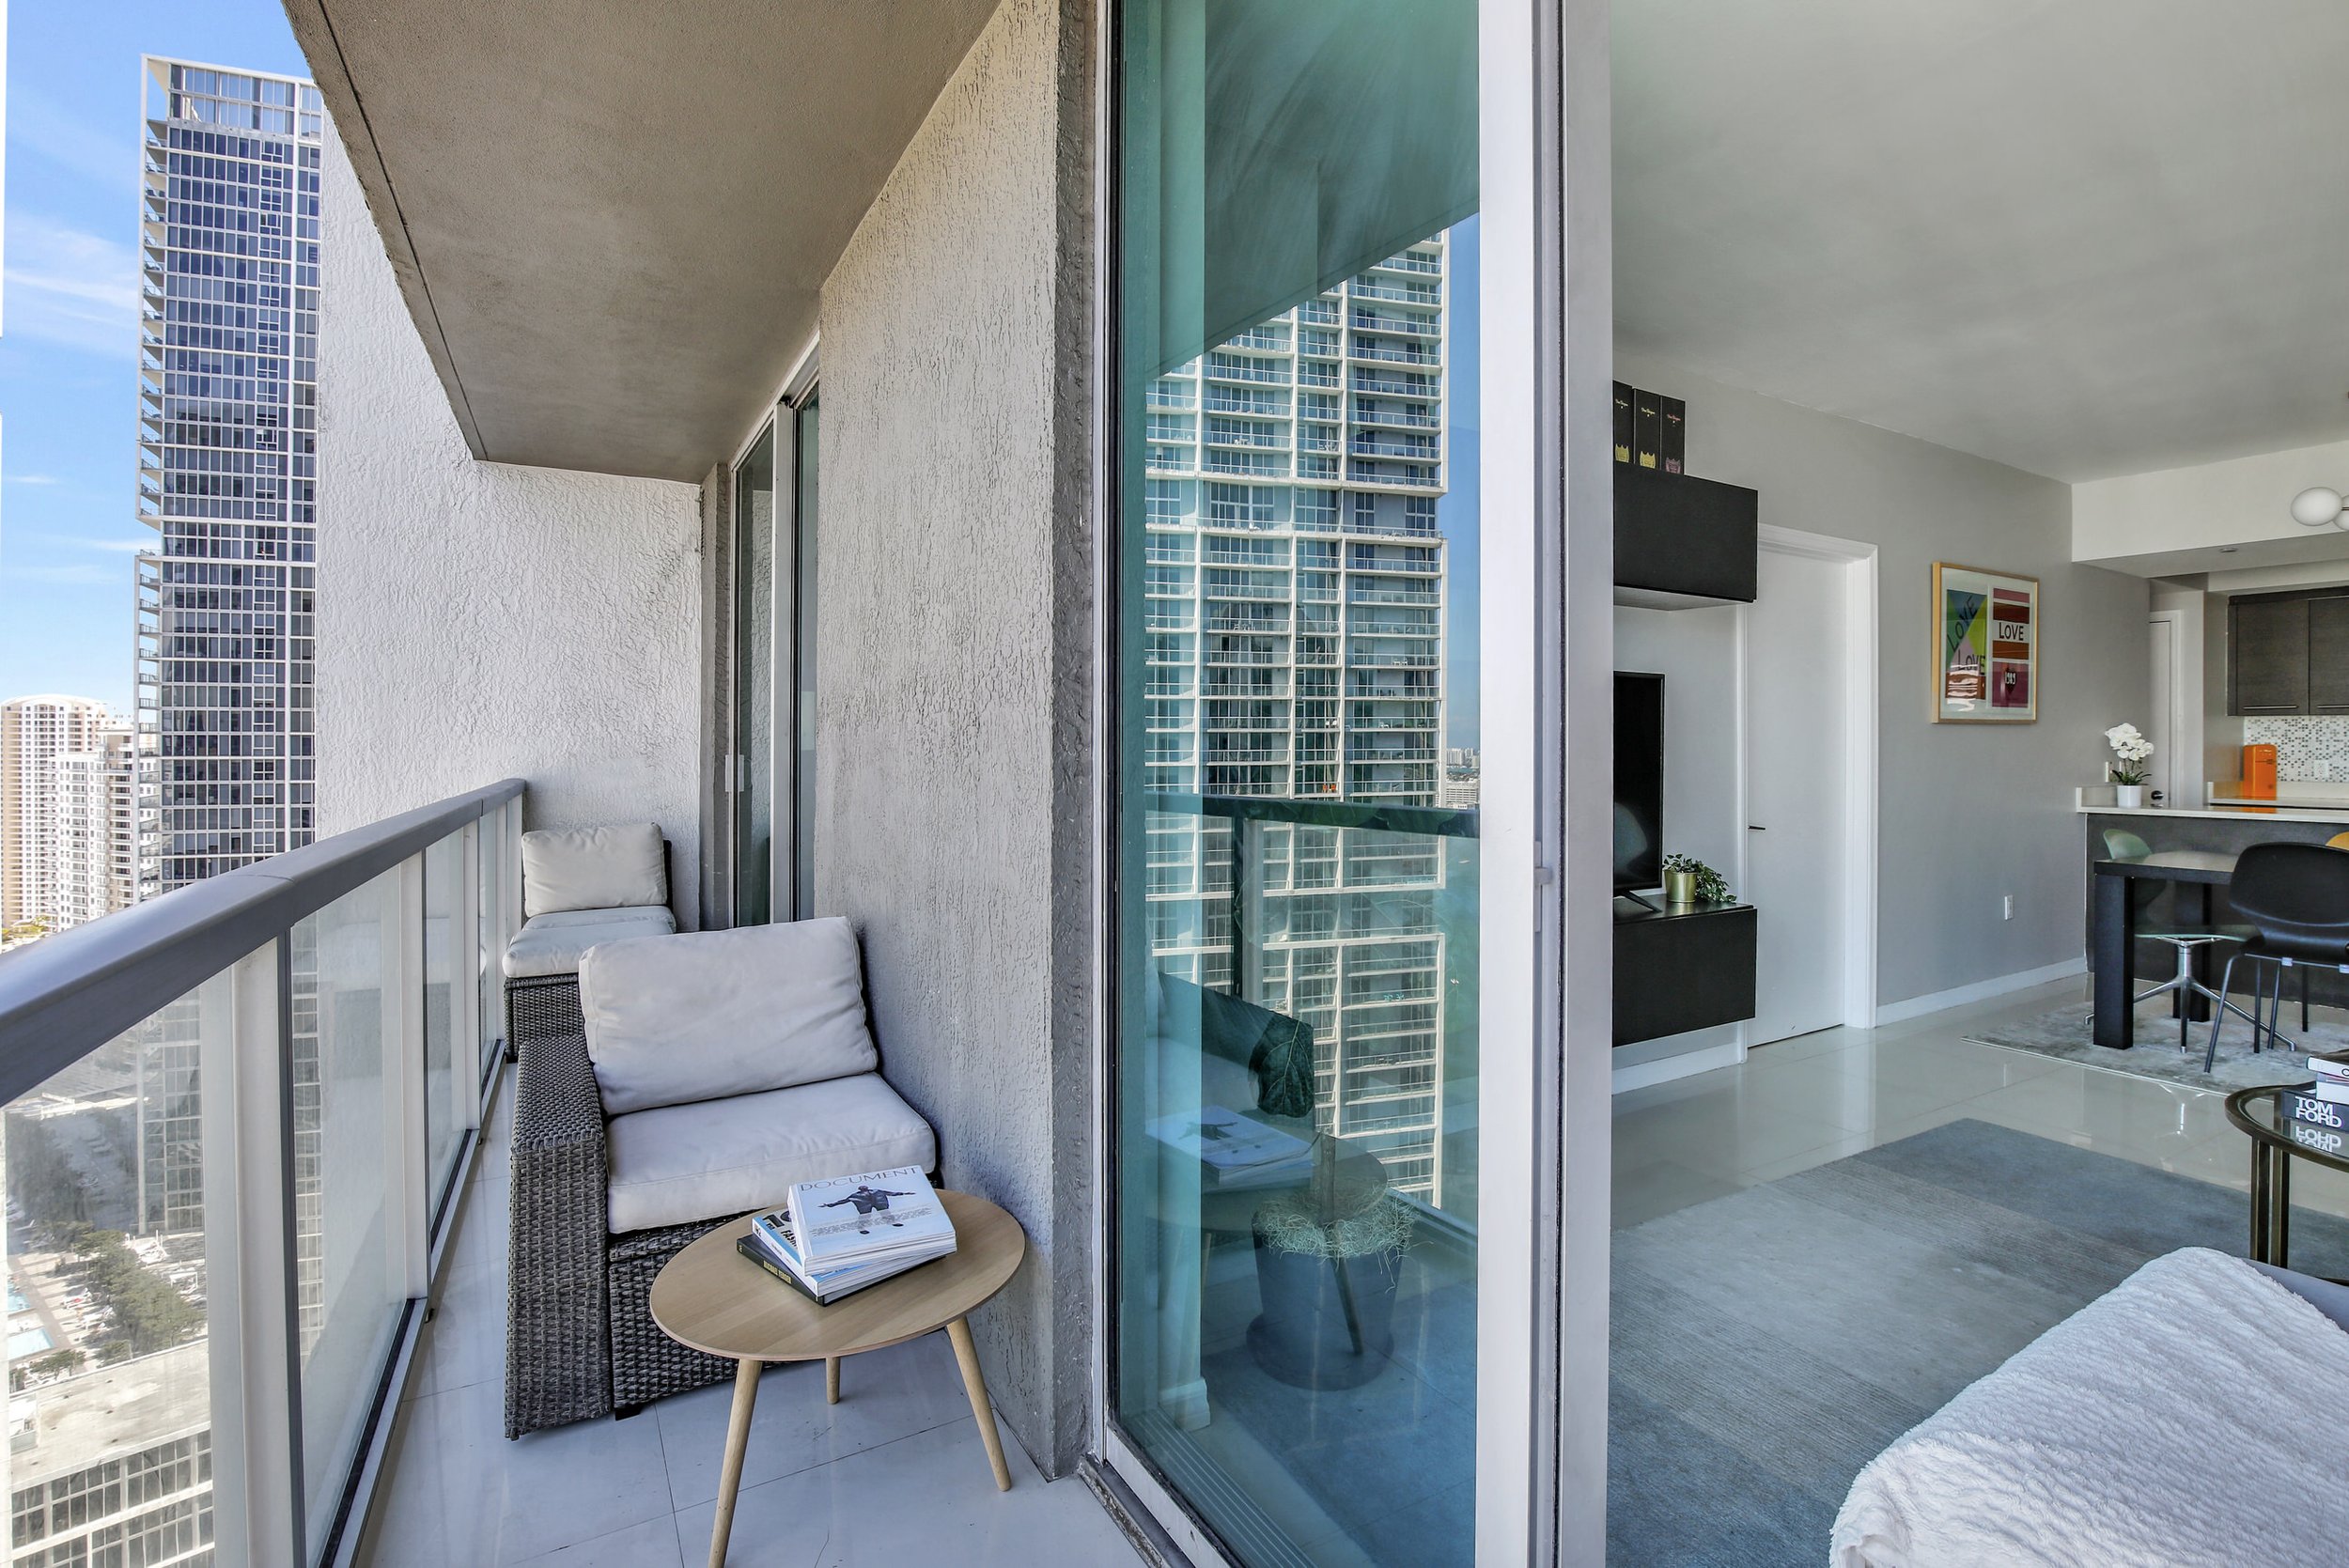 Check Out This Two-Bedroom Condo For Under $900K In Brickell 16.jpg